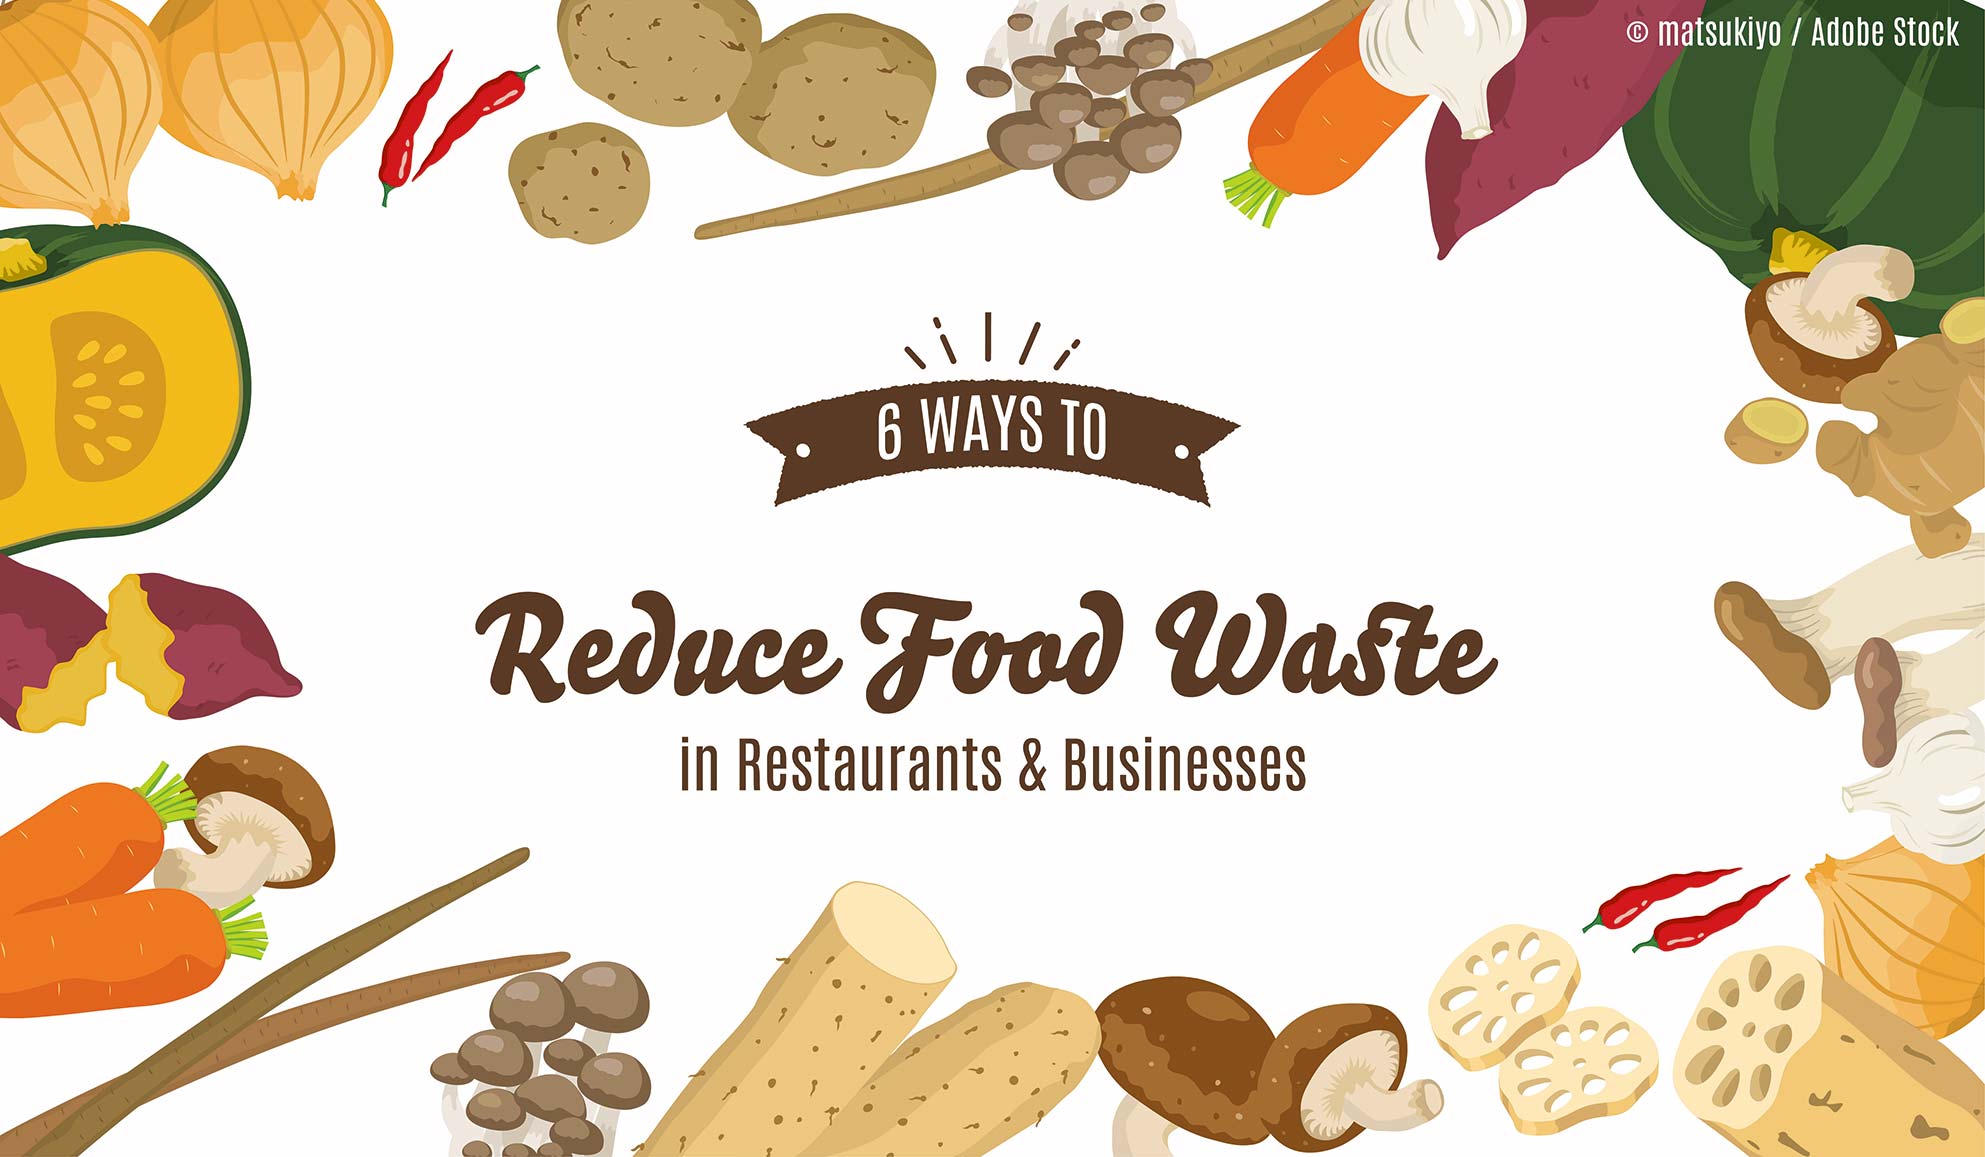 https://www.wastewiseproductsinc.com/wp-content/uploads/2021/12/6-ways-to-reduce-food-waste-in-restaurants-and-business.jpg